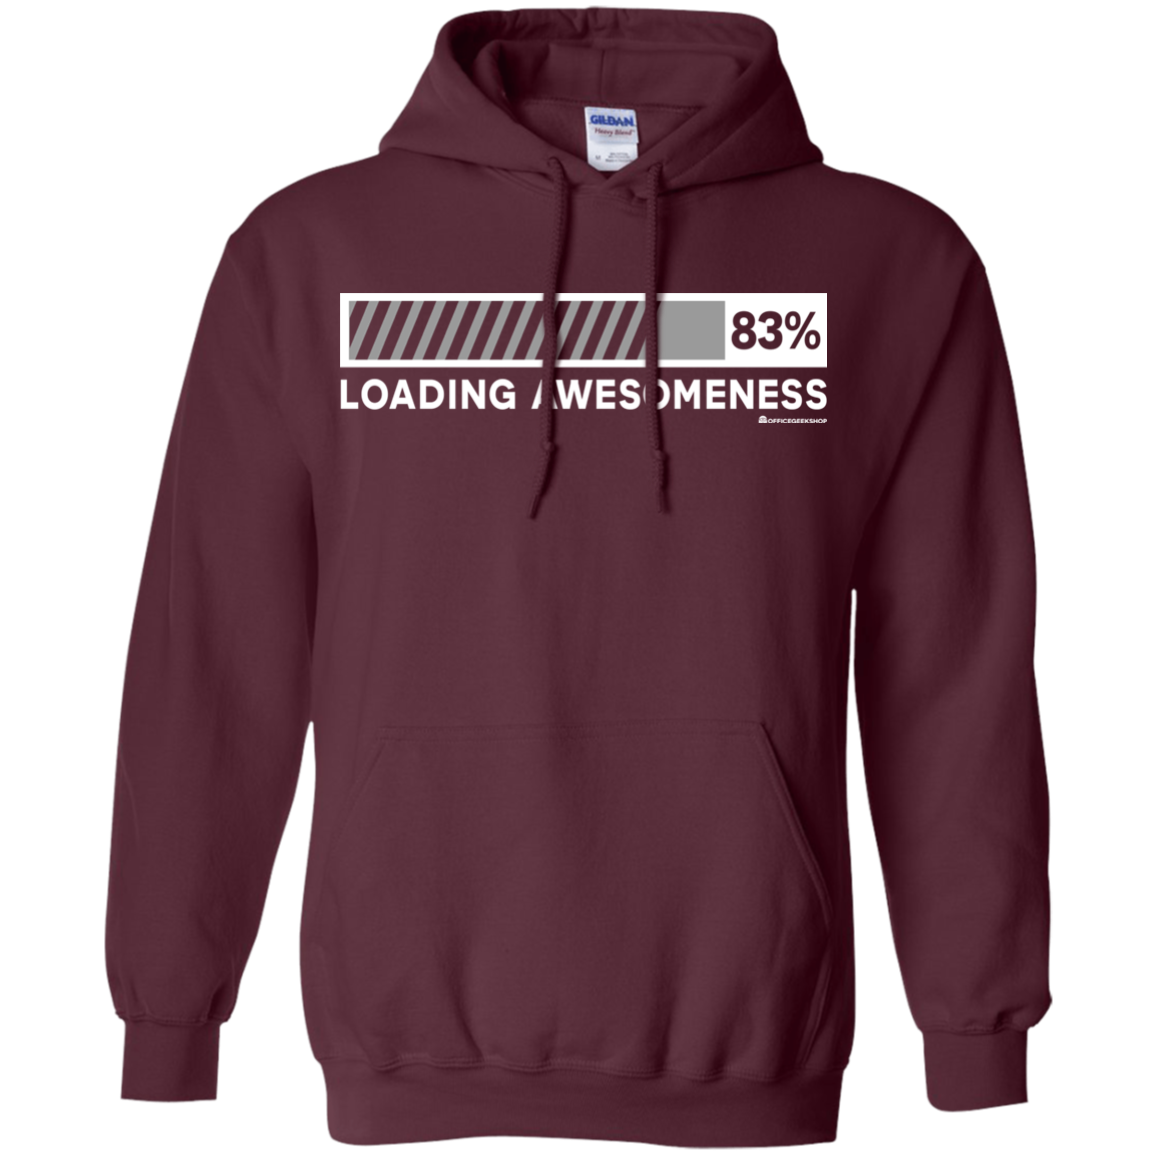 Loading Awesomeness Pullover Hoodie